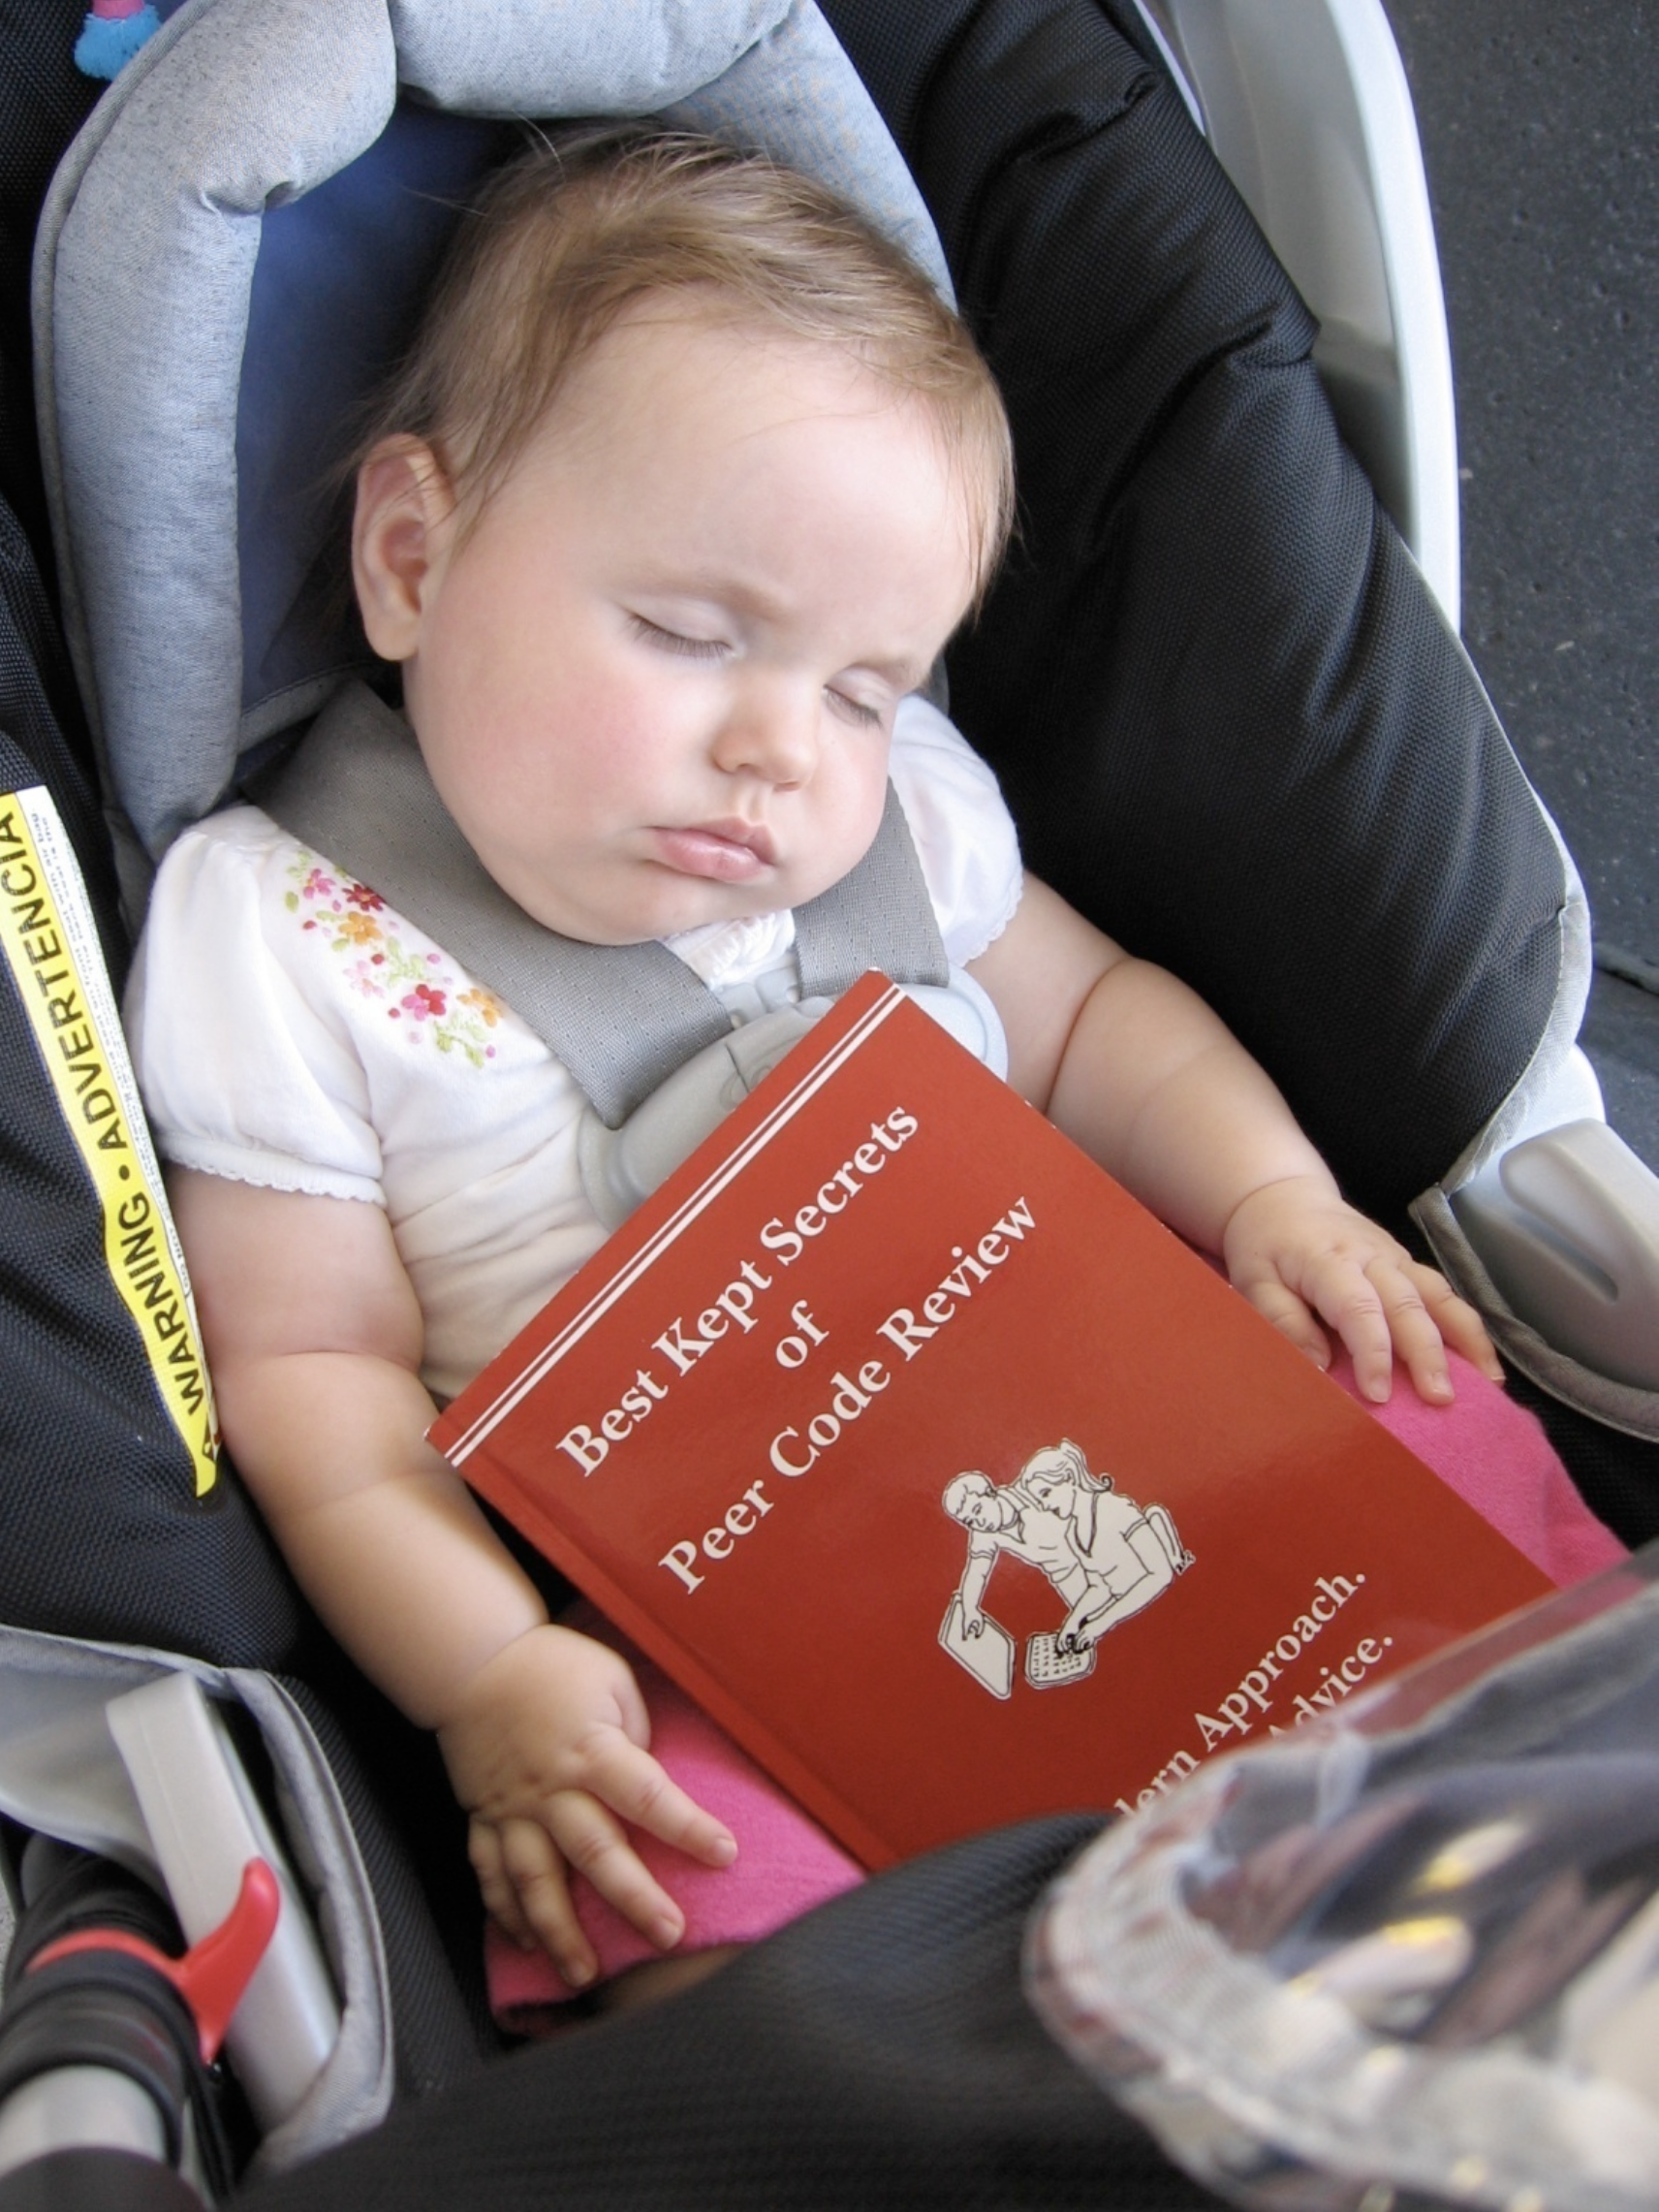 Sleeping baby holding the book "Best Kept Secrets of Peer Code Review" by Jason Cohen